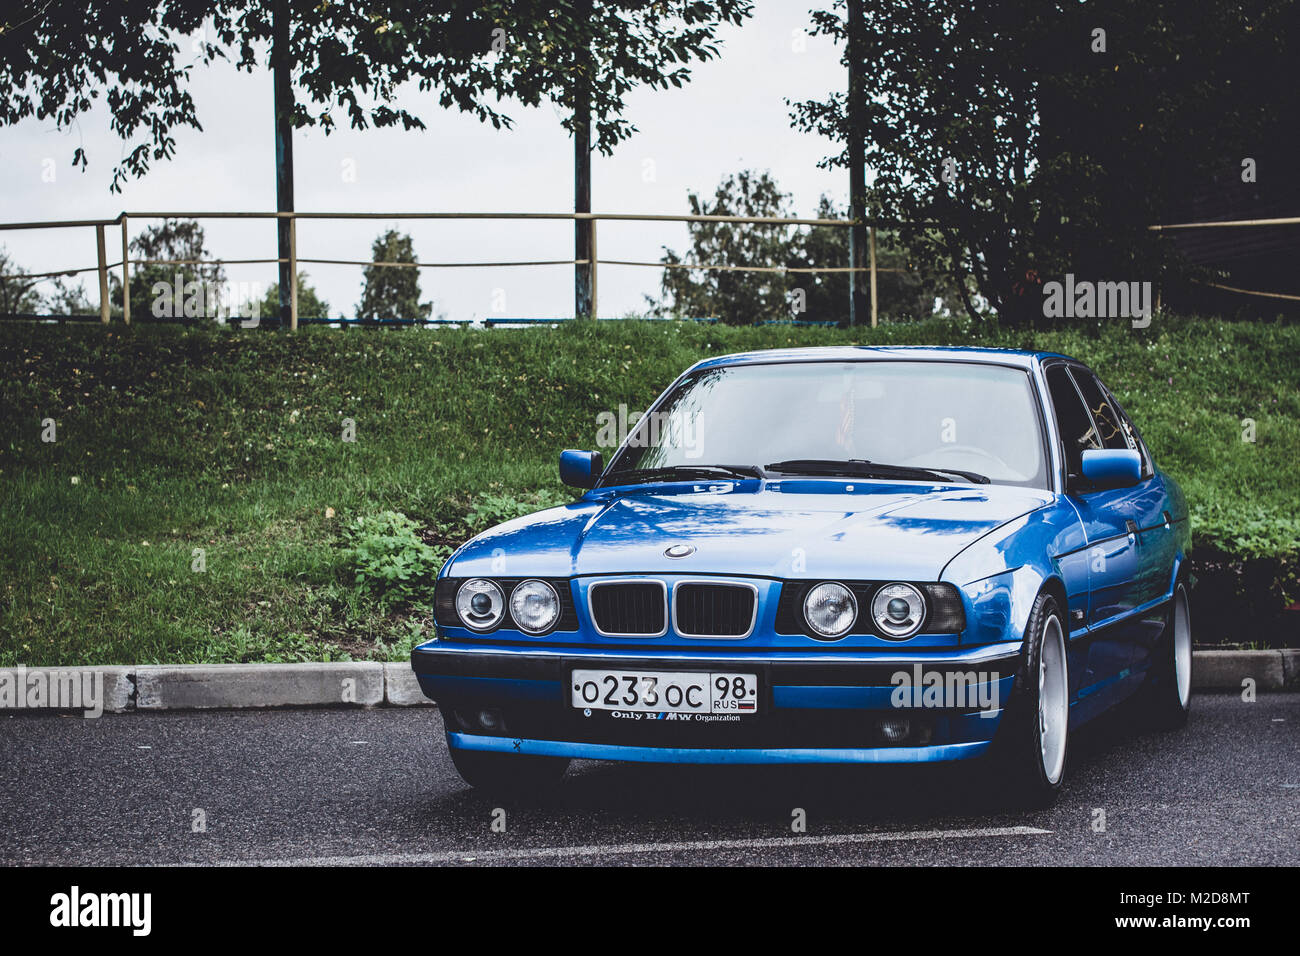 Saint-Petersburg, Russia - September 16, 2017: Blue retro car BMW 5-series 525, old model and release year. Road speed car of German Bavarian manufact Stock Photo